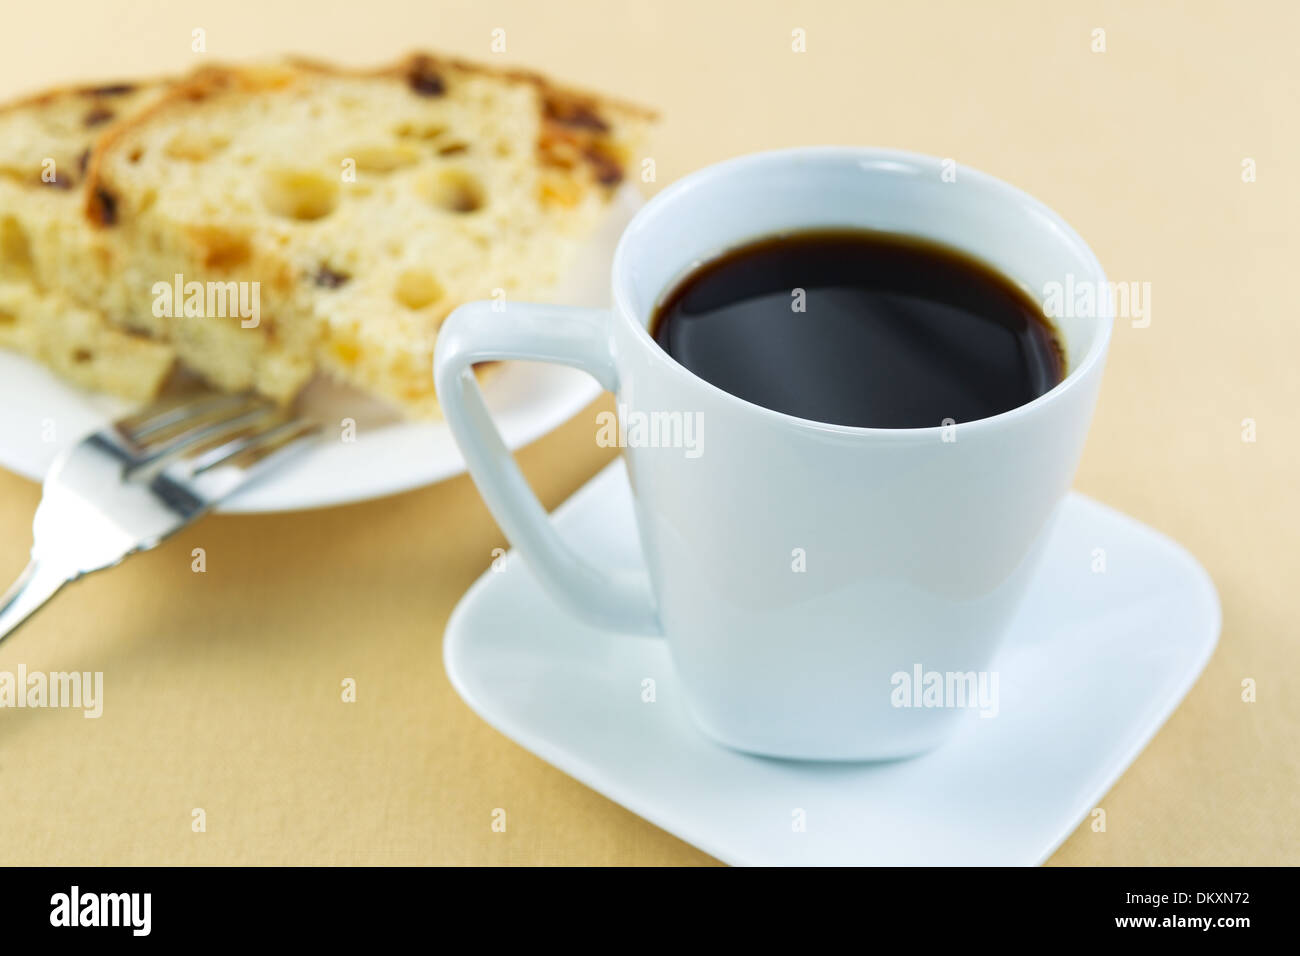 Horizontal photo of freshly brewed coffee, in white cup, with Italian cake slices on a white plate along with fork Stock Photo